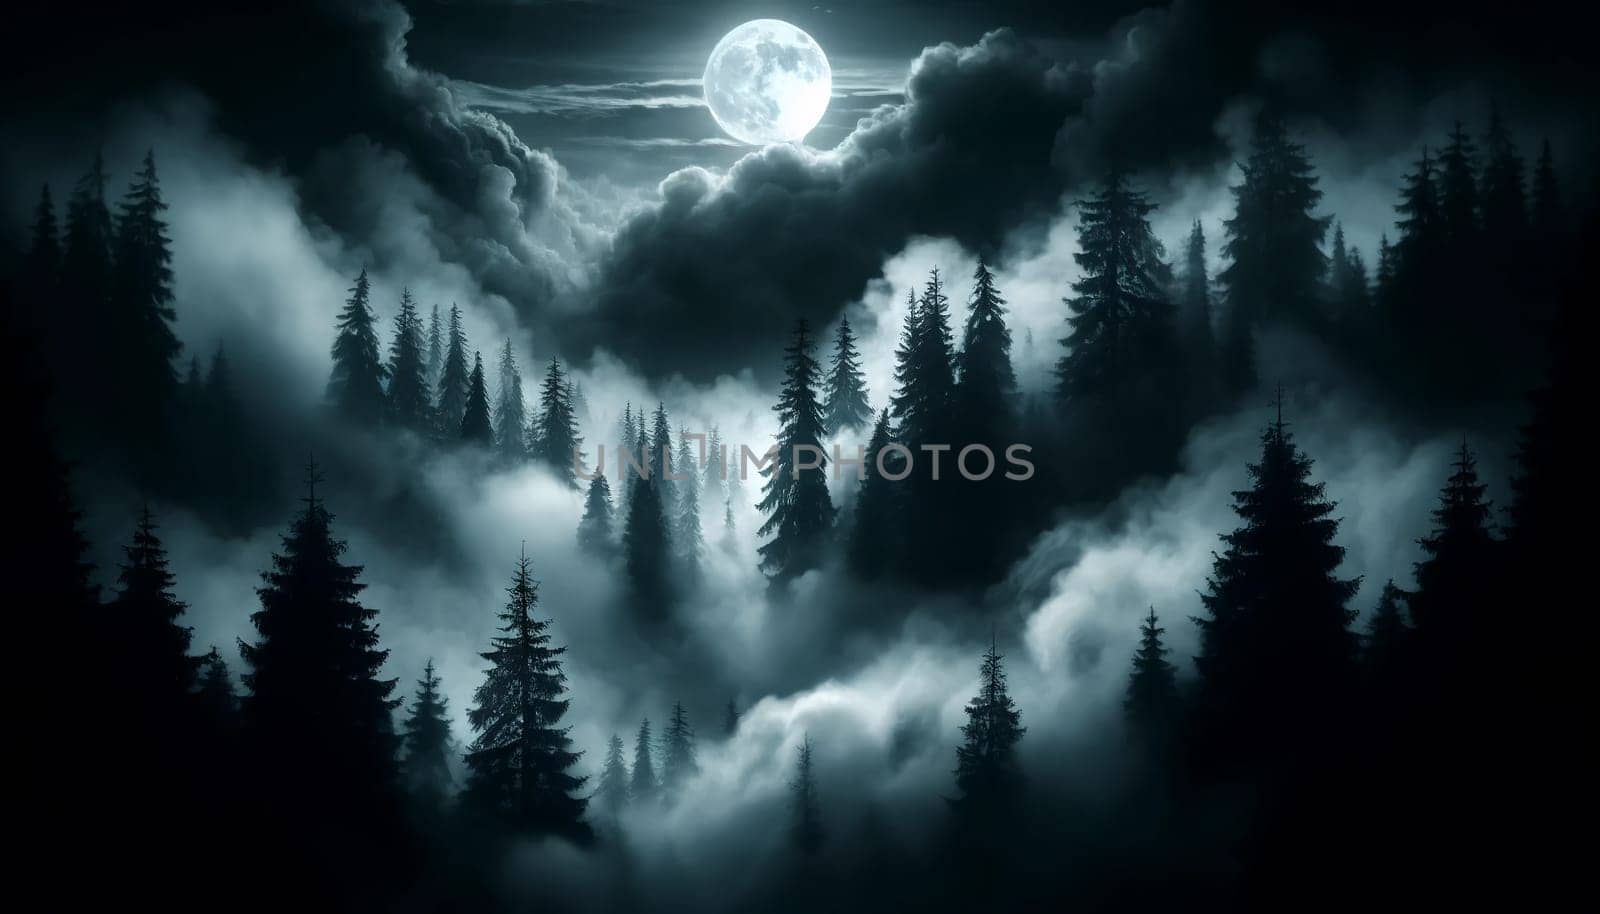 eerie gloomy pine forest shrouded in thick night fog, full moon visible through a gap in heavy clouds by Annado